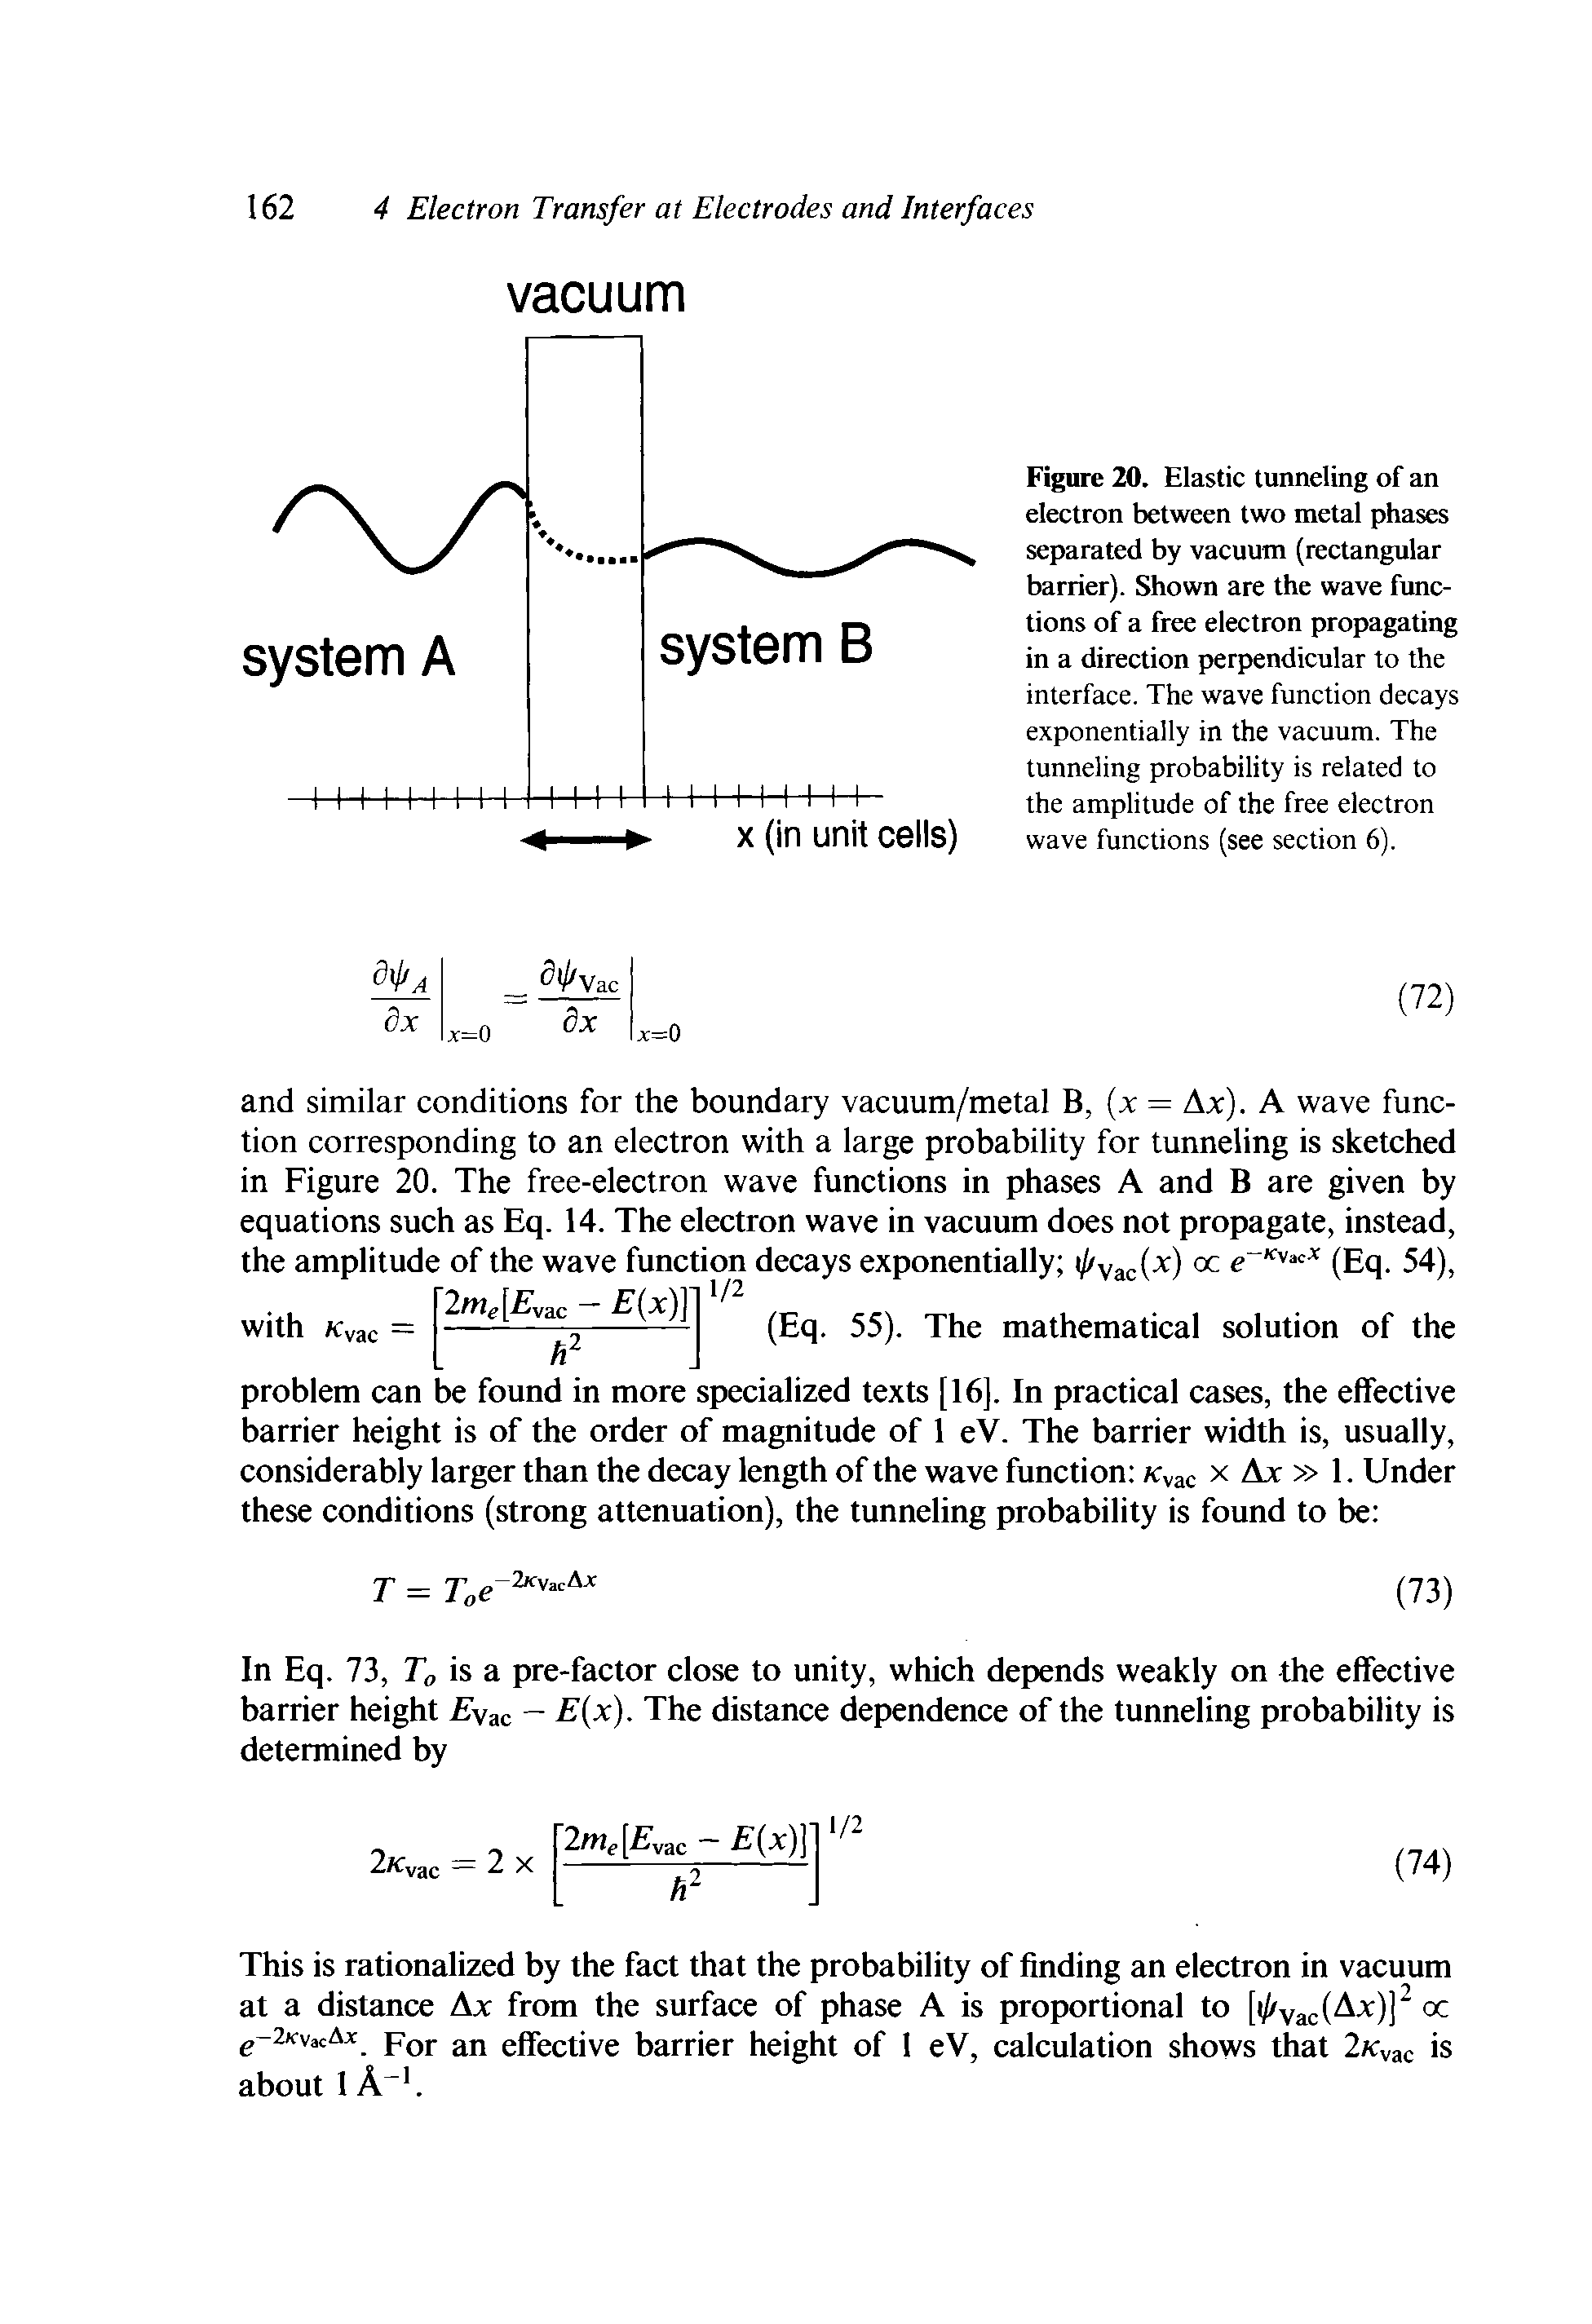 Figure 20. Elastic tunneling of an electron between two metal phases separated by vacuum (rectangular barrier). Shown are the wave functions of a free electron propagating in a direction perpendicular to the interface. The wave function decays exponentially in the vacuum. The tunneling probability is related to the amplitude of the free electron wave functions (see section 6).